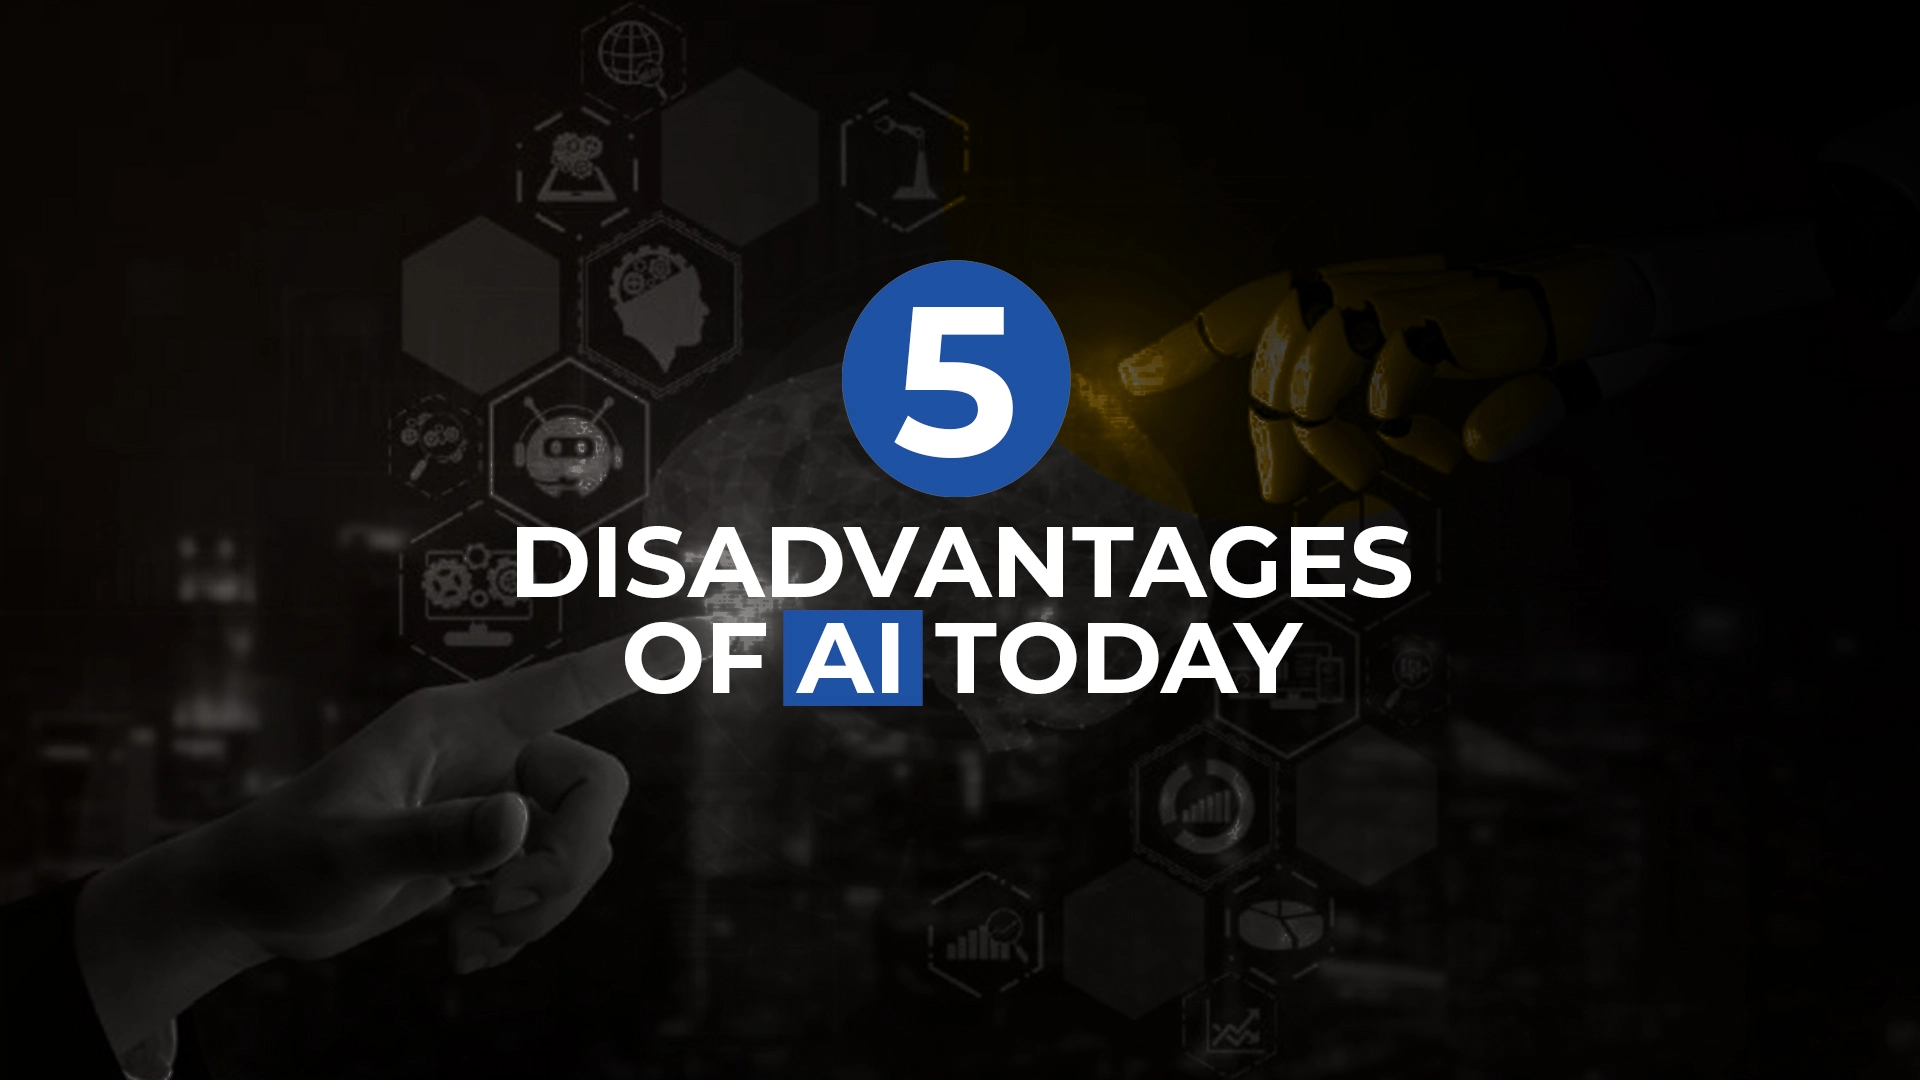 What are the top 5 drawbacks of AI?